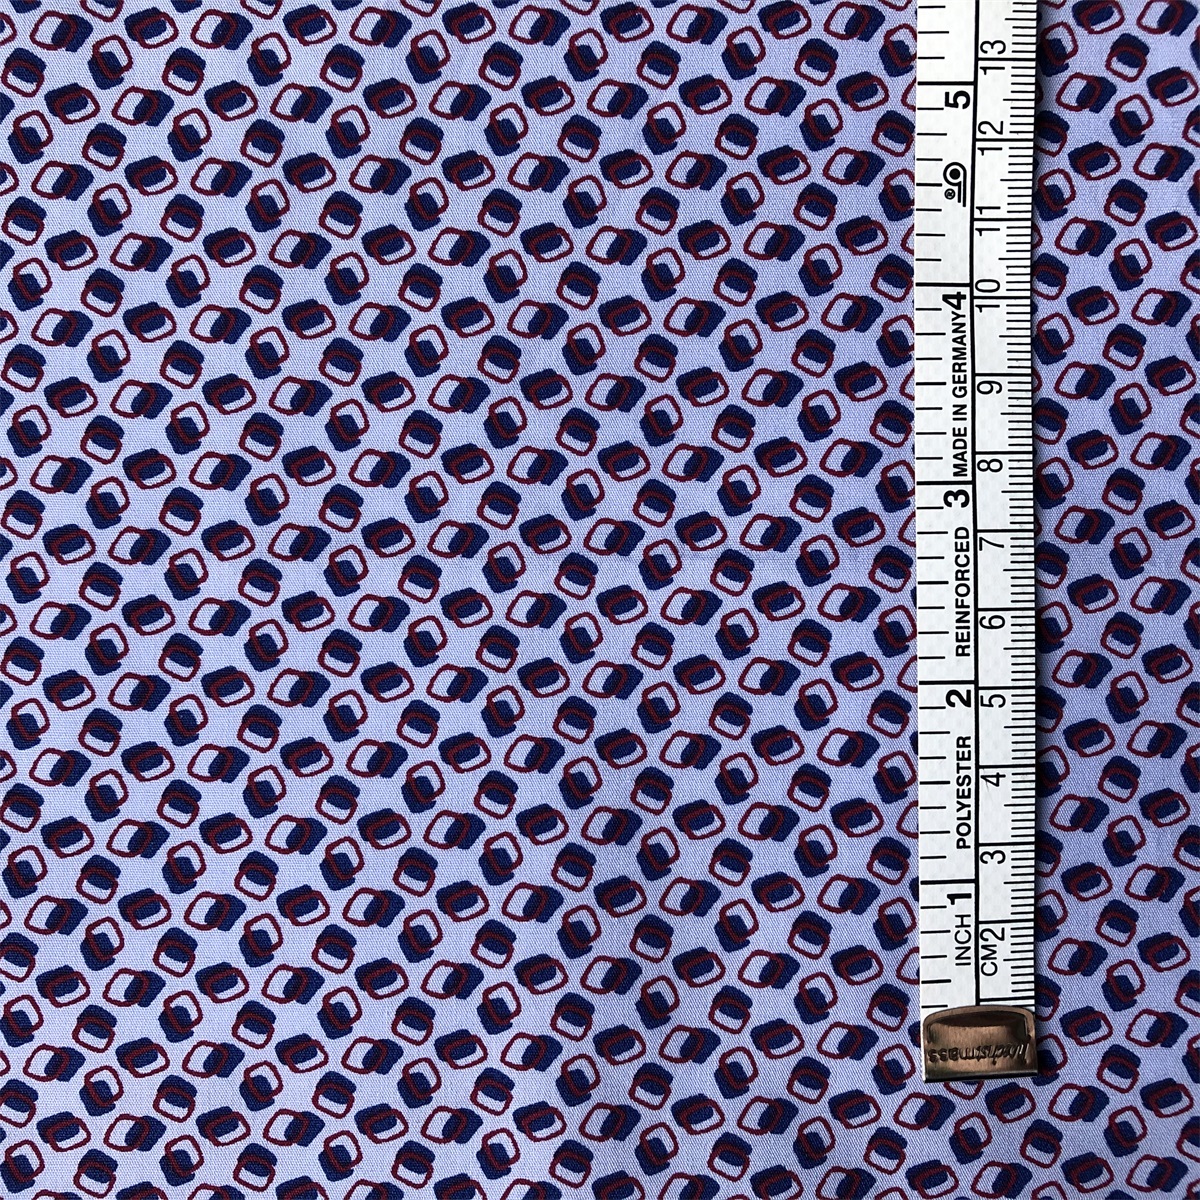 Hot Sun-rising Textile Cotton fabric high quality Eco-friendly 100% cotton poplin printed woven fabric for men's shirts